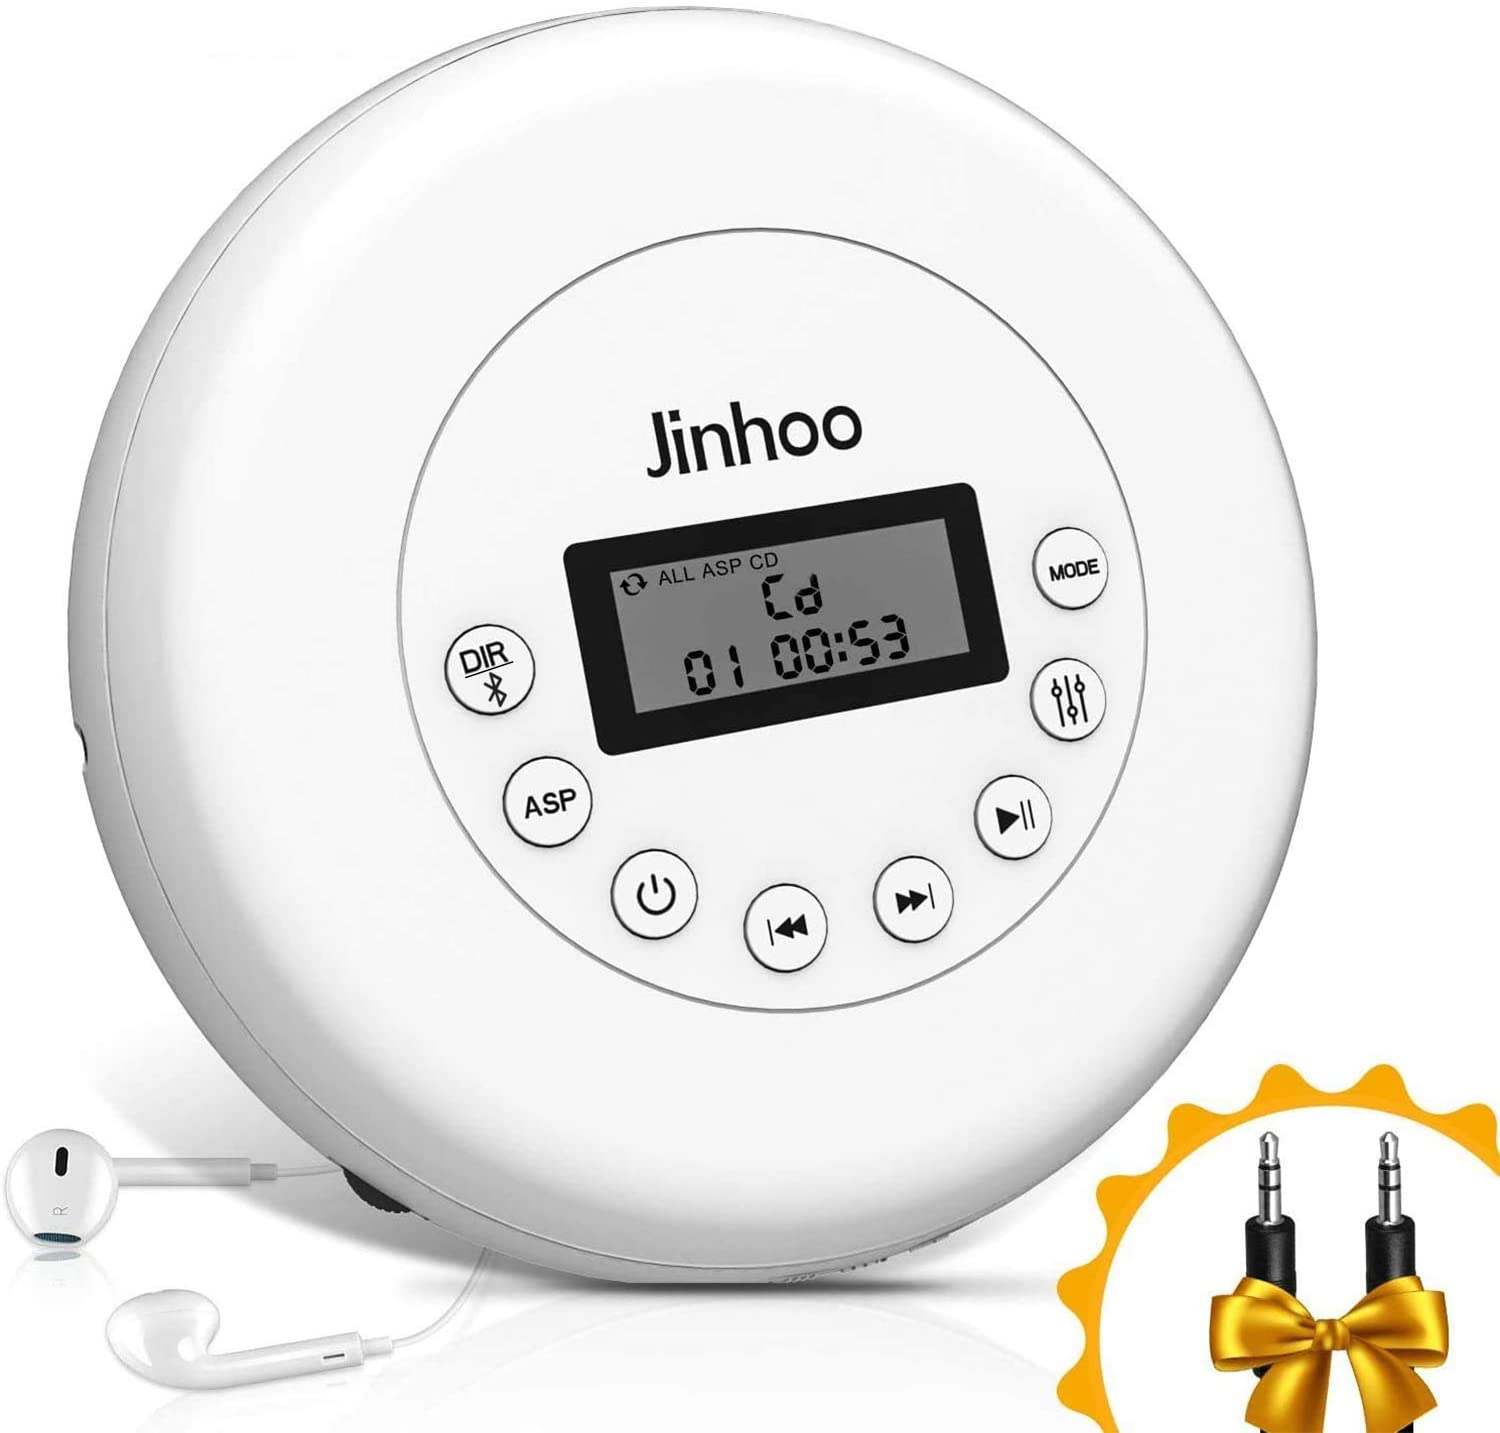 Jinhoo Bluetooth Portable CD Player with Wired Earbuds